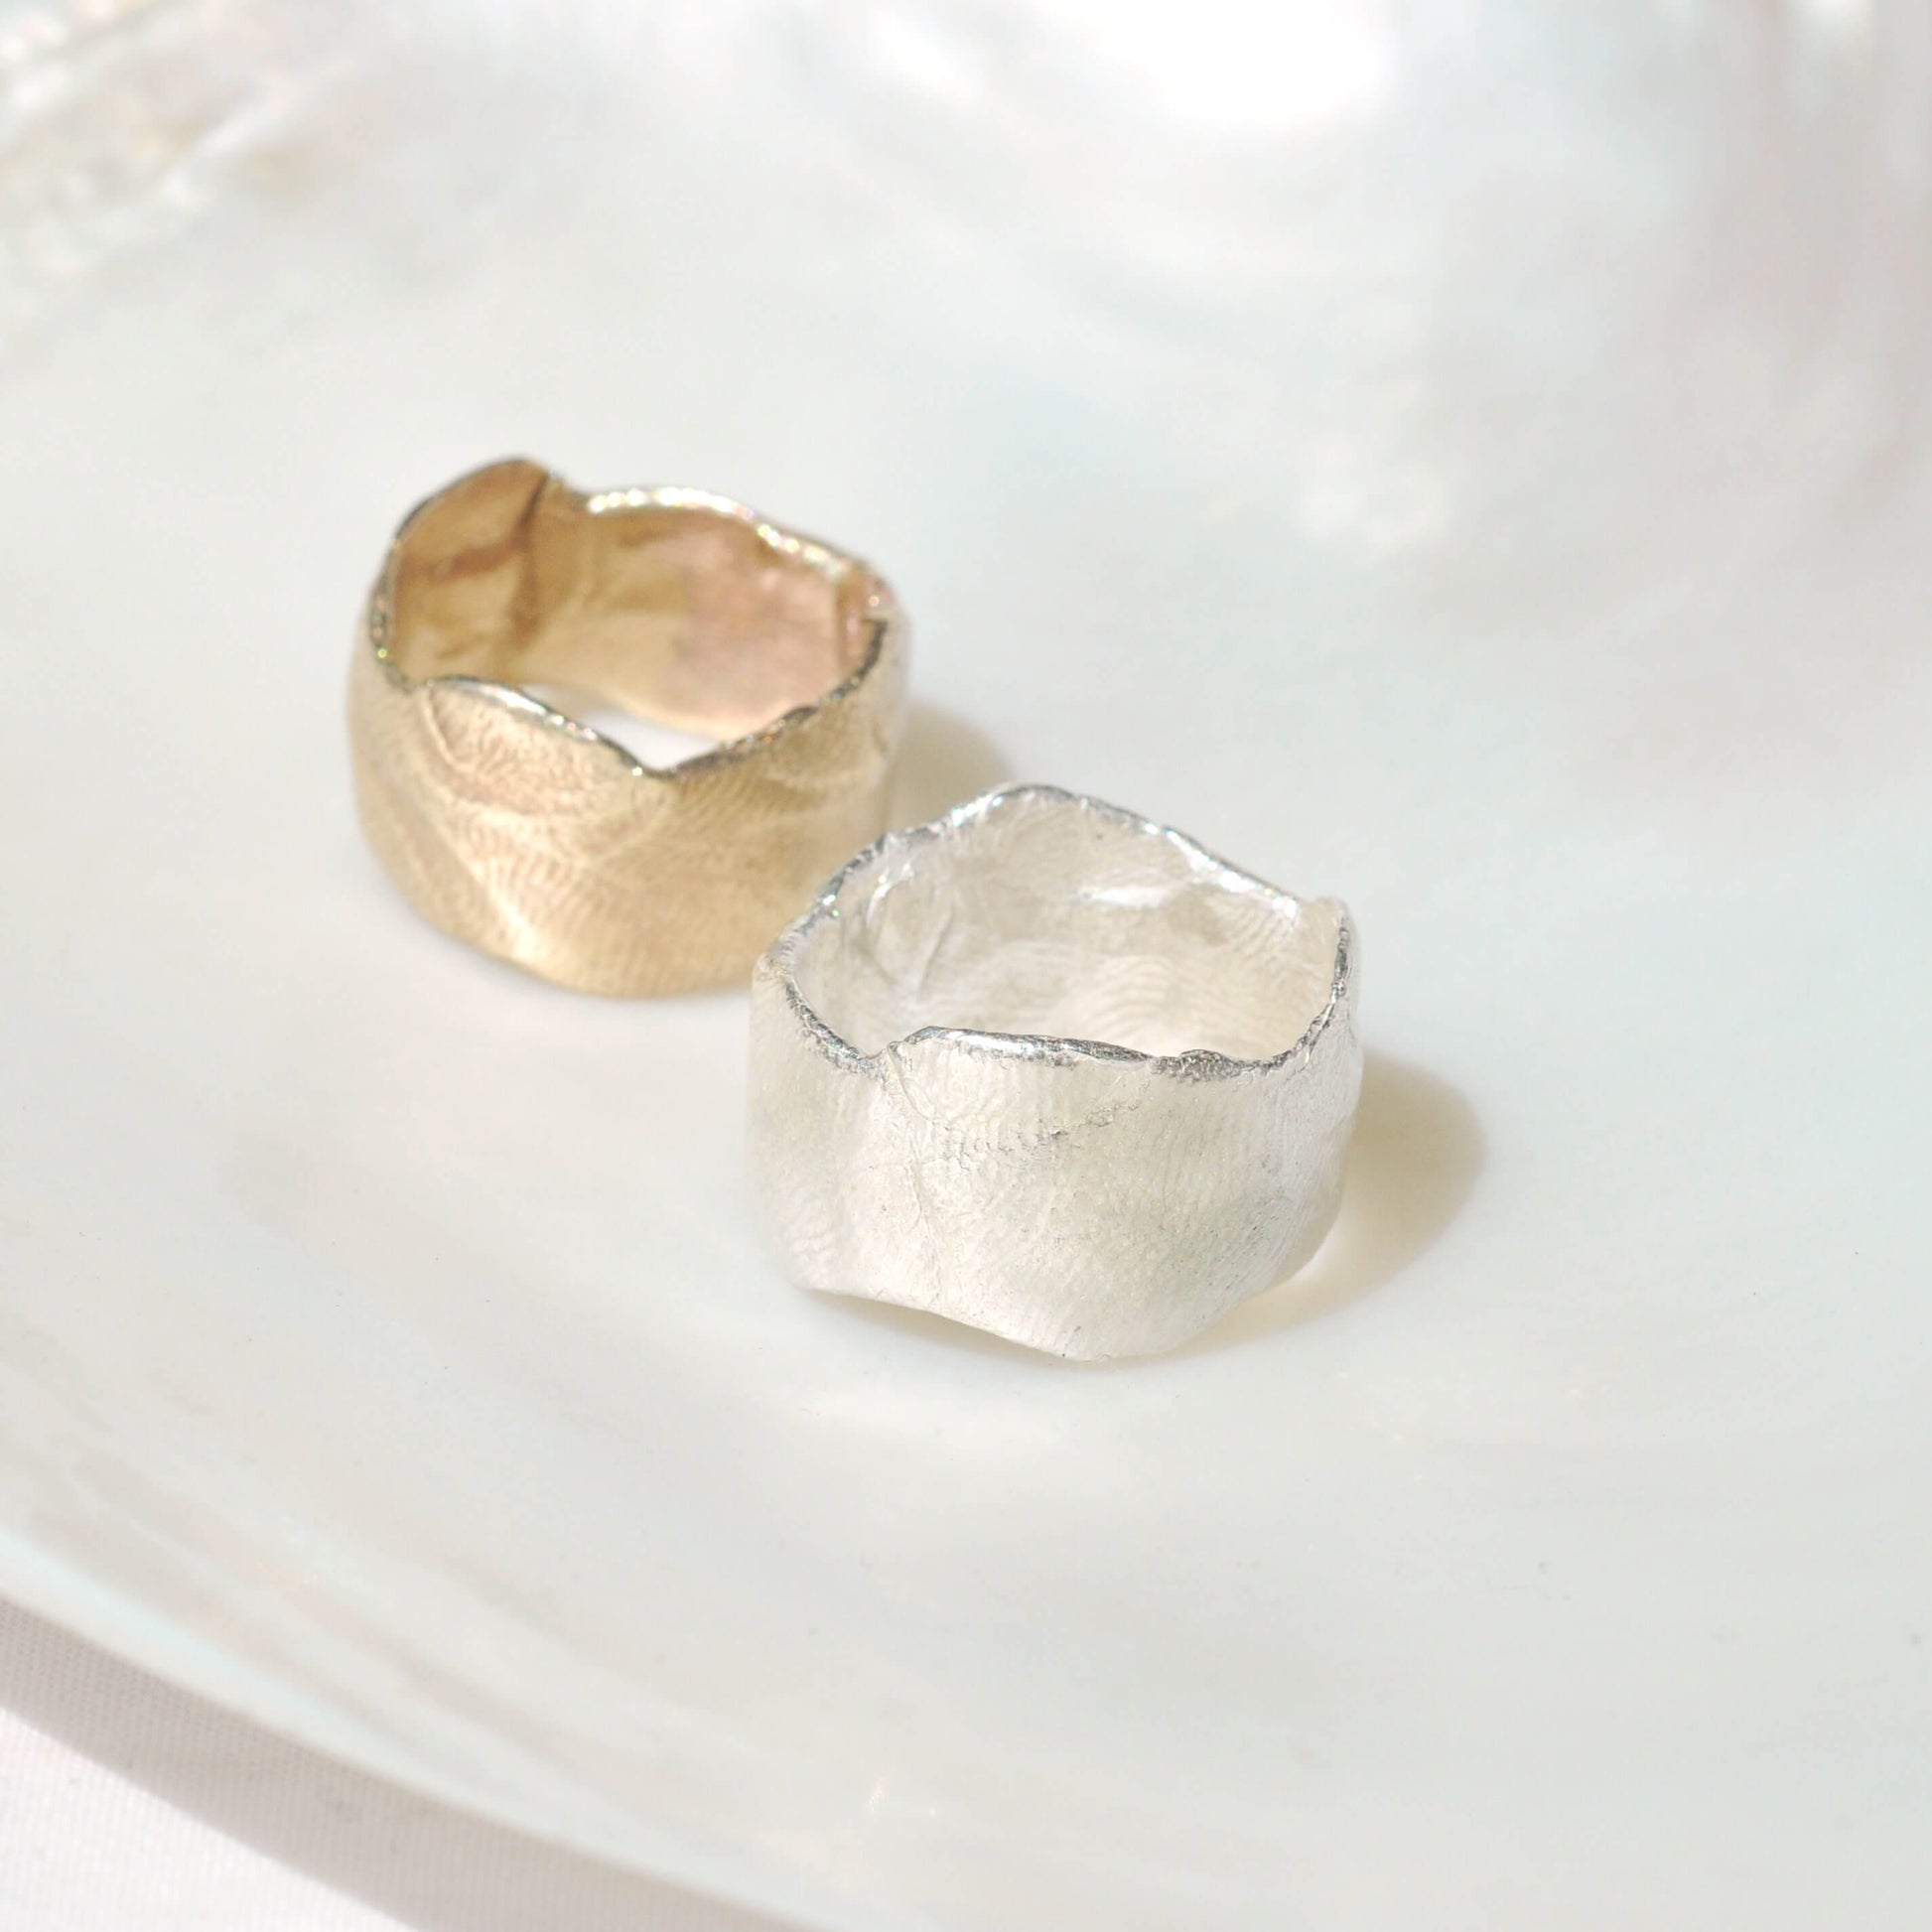 Silver & Gold Statement Ring - Drumgreenagh Ethical Gift Shop